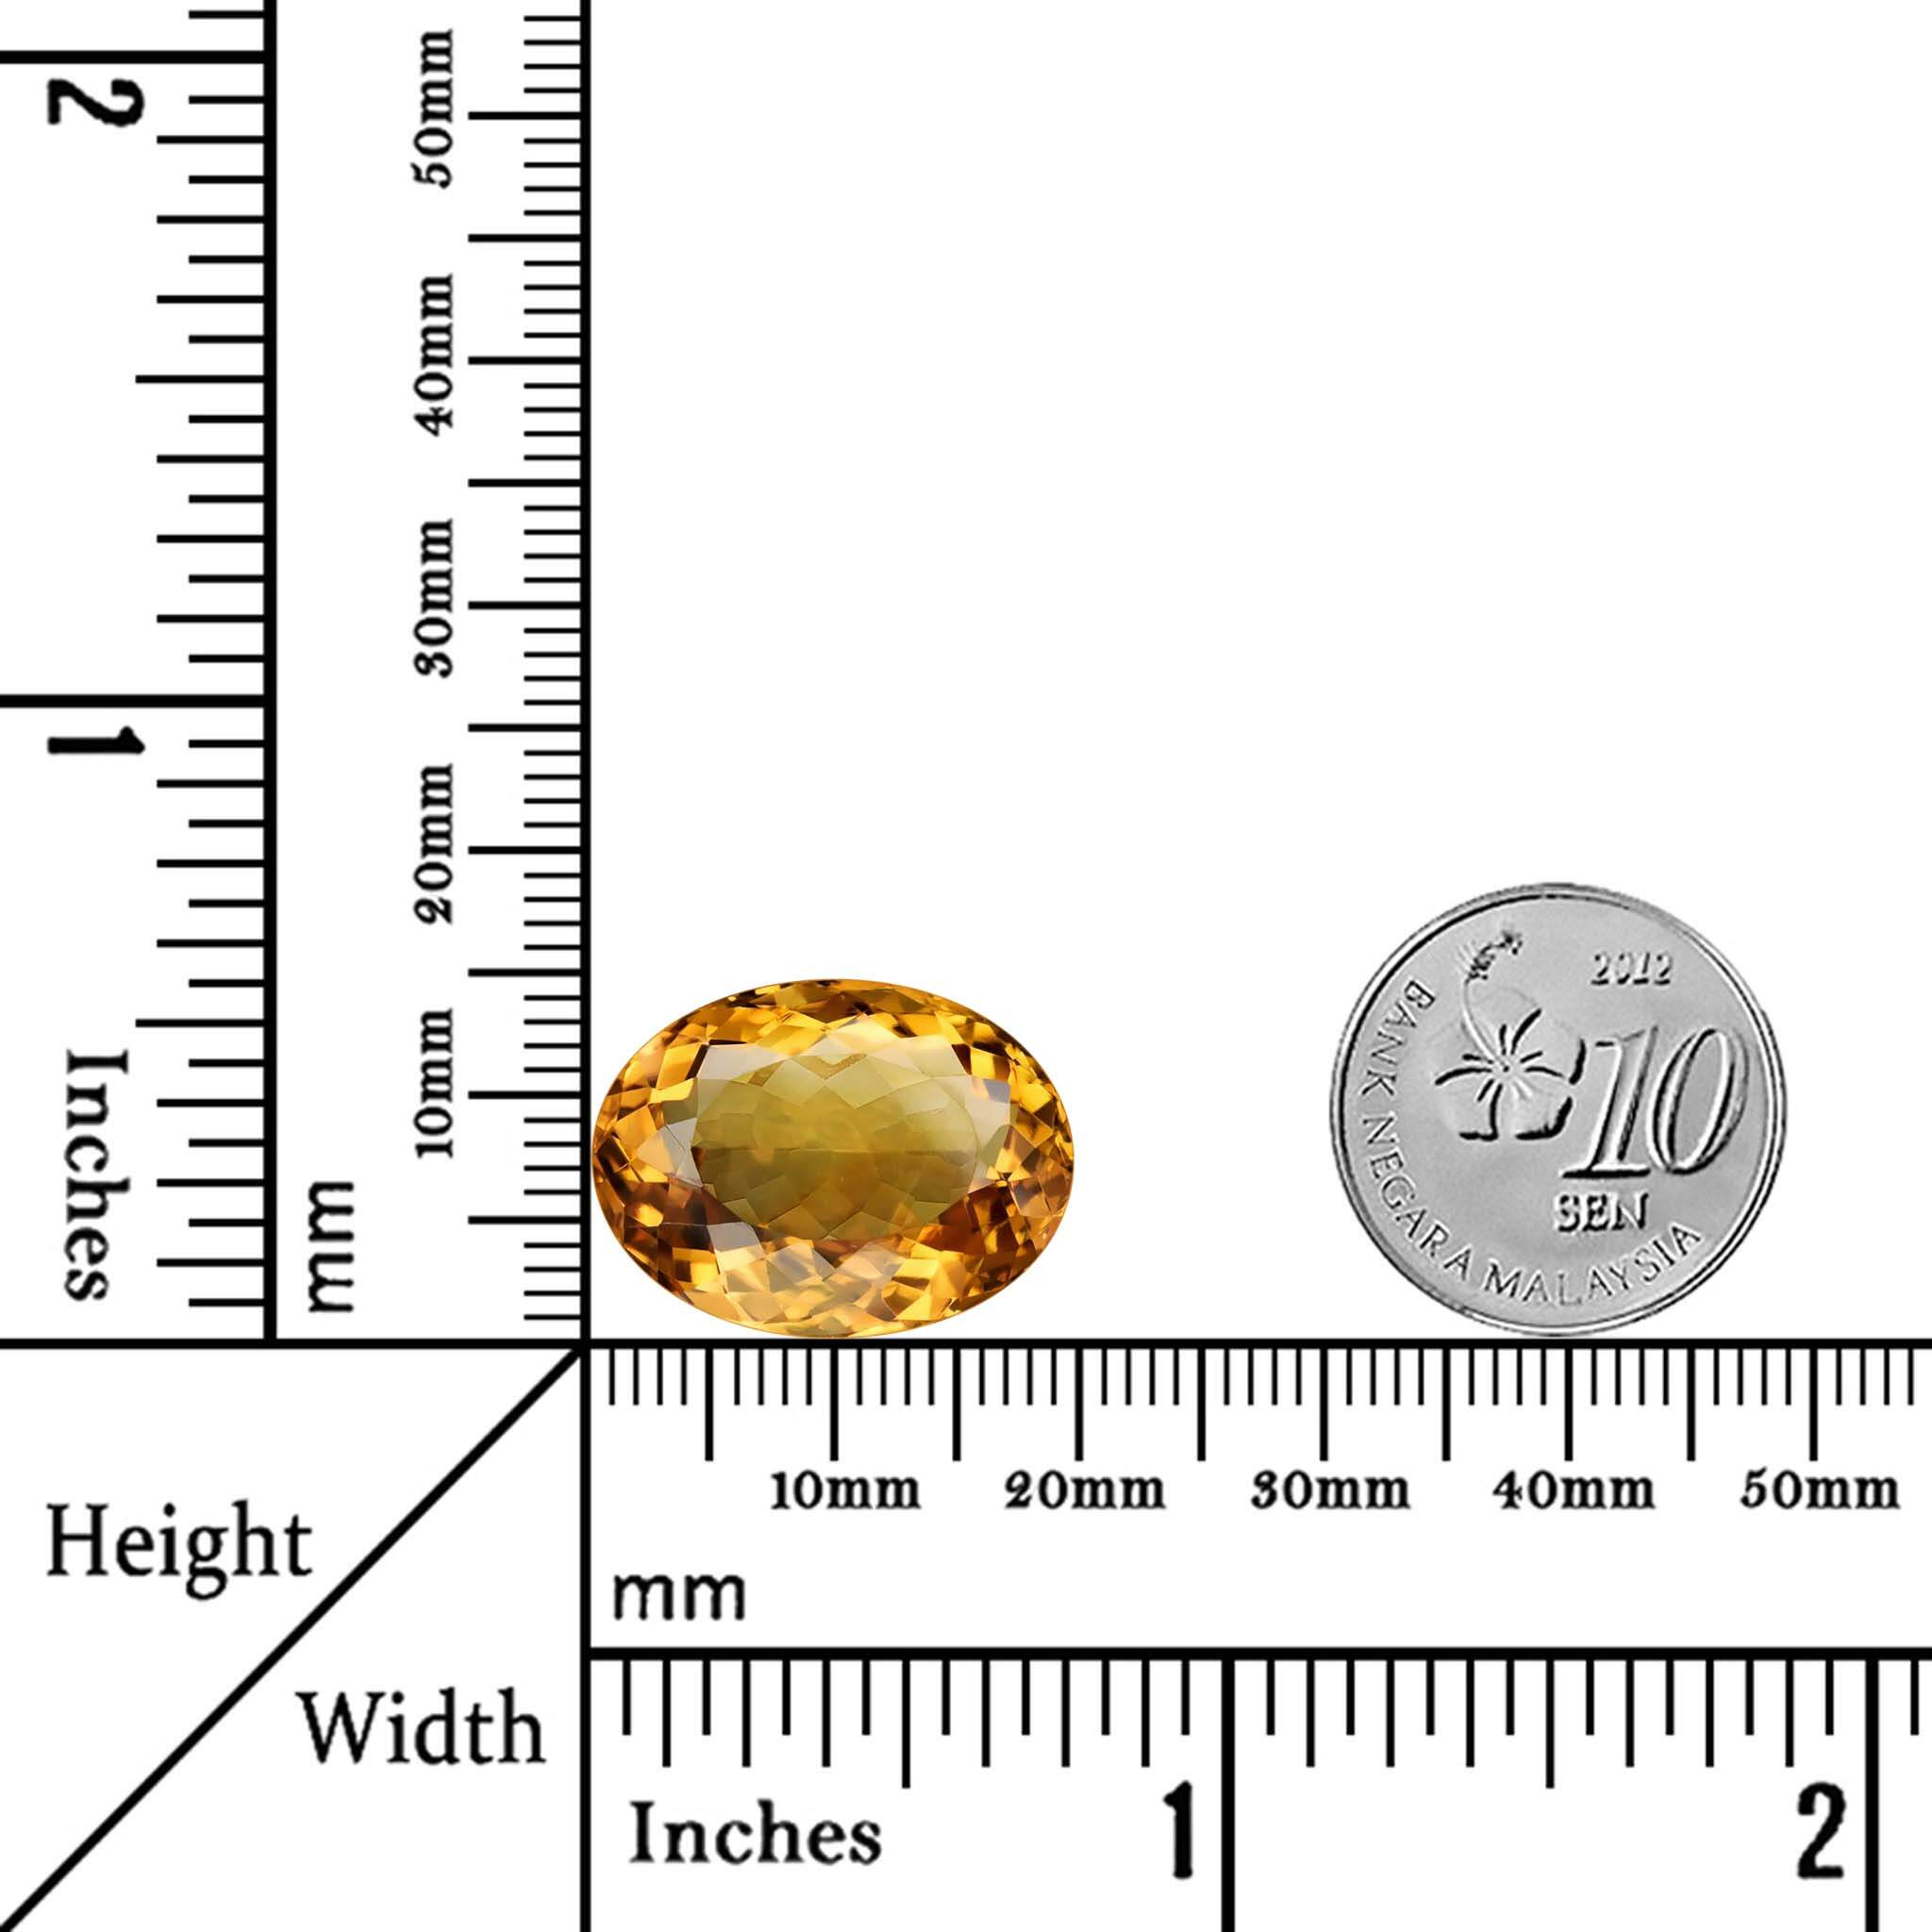 17.09 Carats - Natural Eye Clean Unheated Golden Yellow Citrine